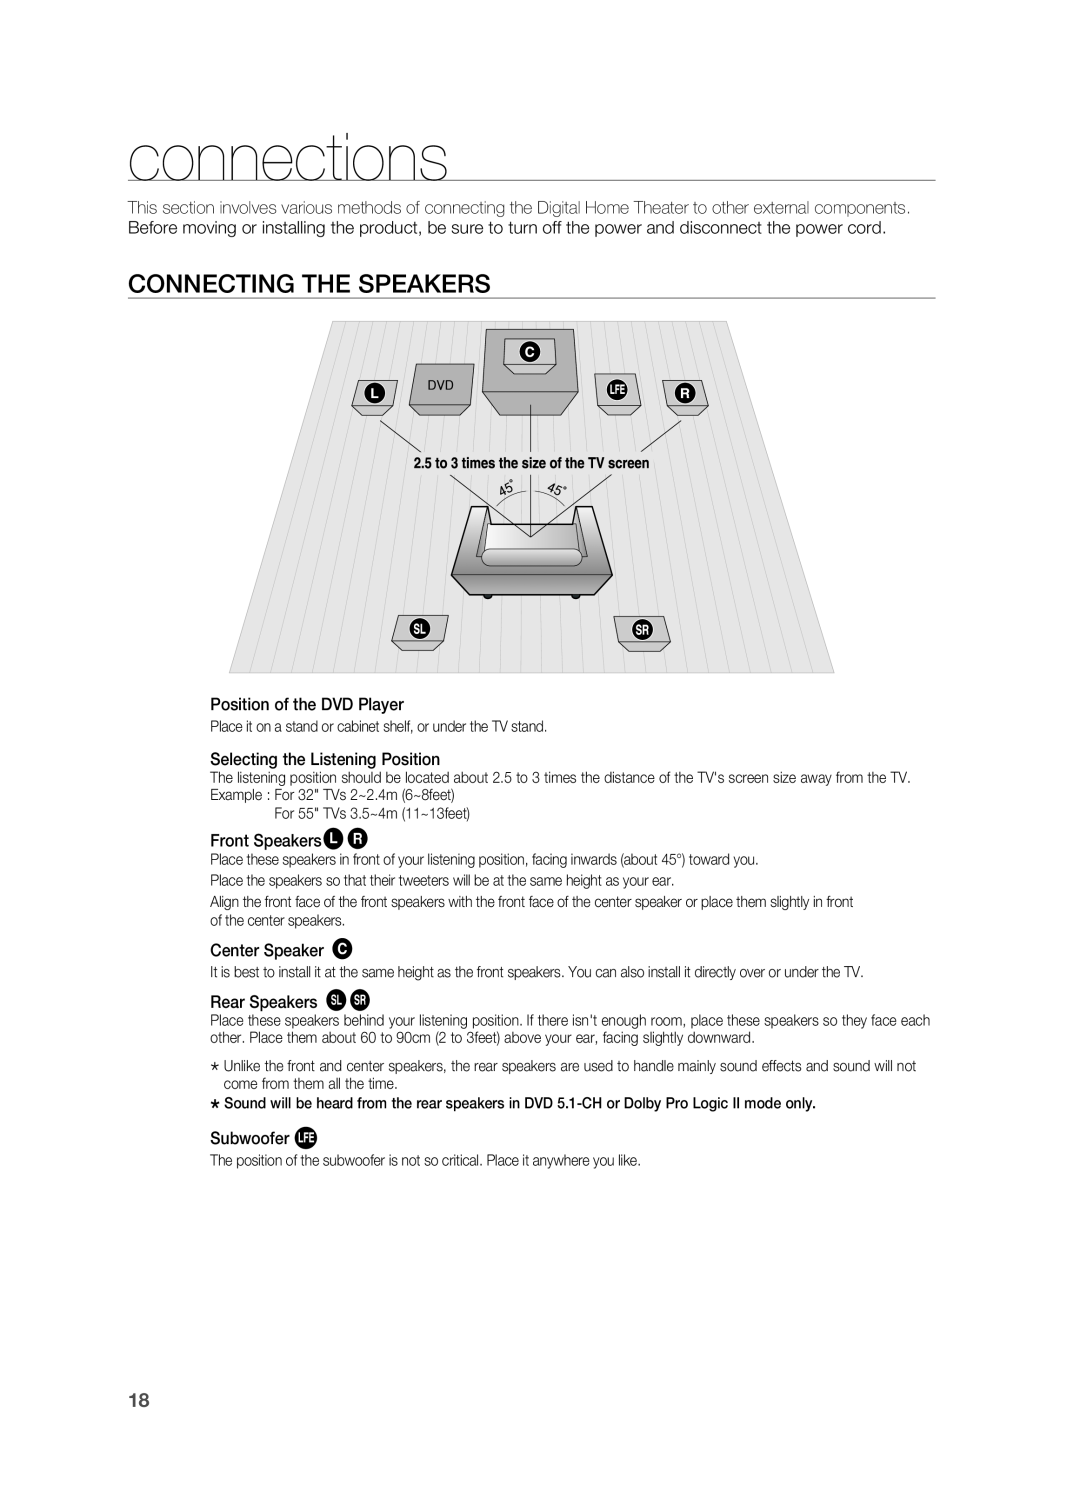 Samsung HT-TZ515 user manual connections, Connecting the Speakers 